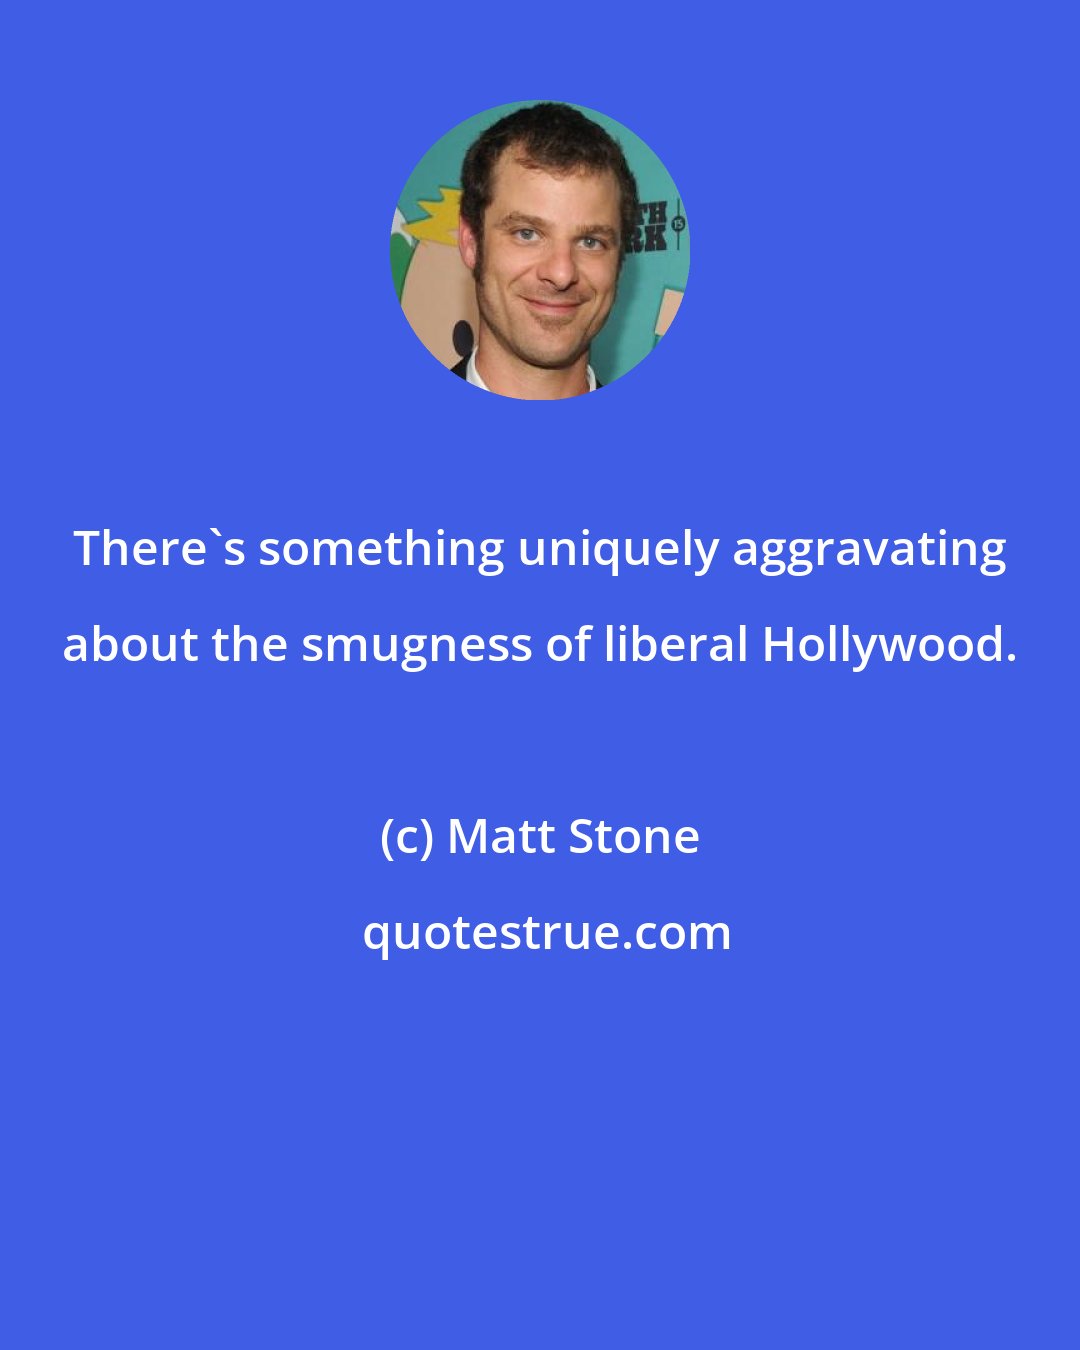 Matt Stone: There's something uniquely aggravating about the smugness of liberal Hollywood.